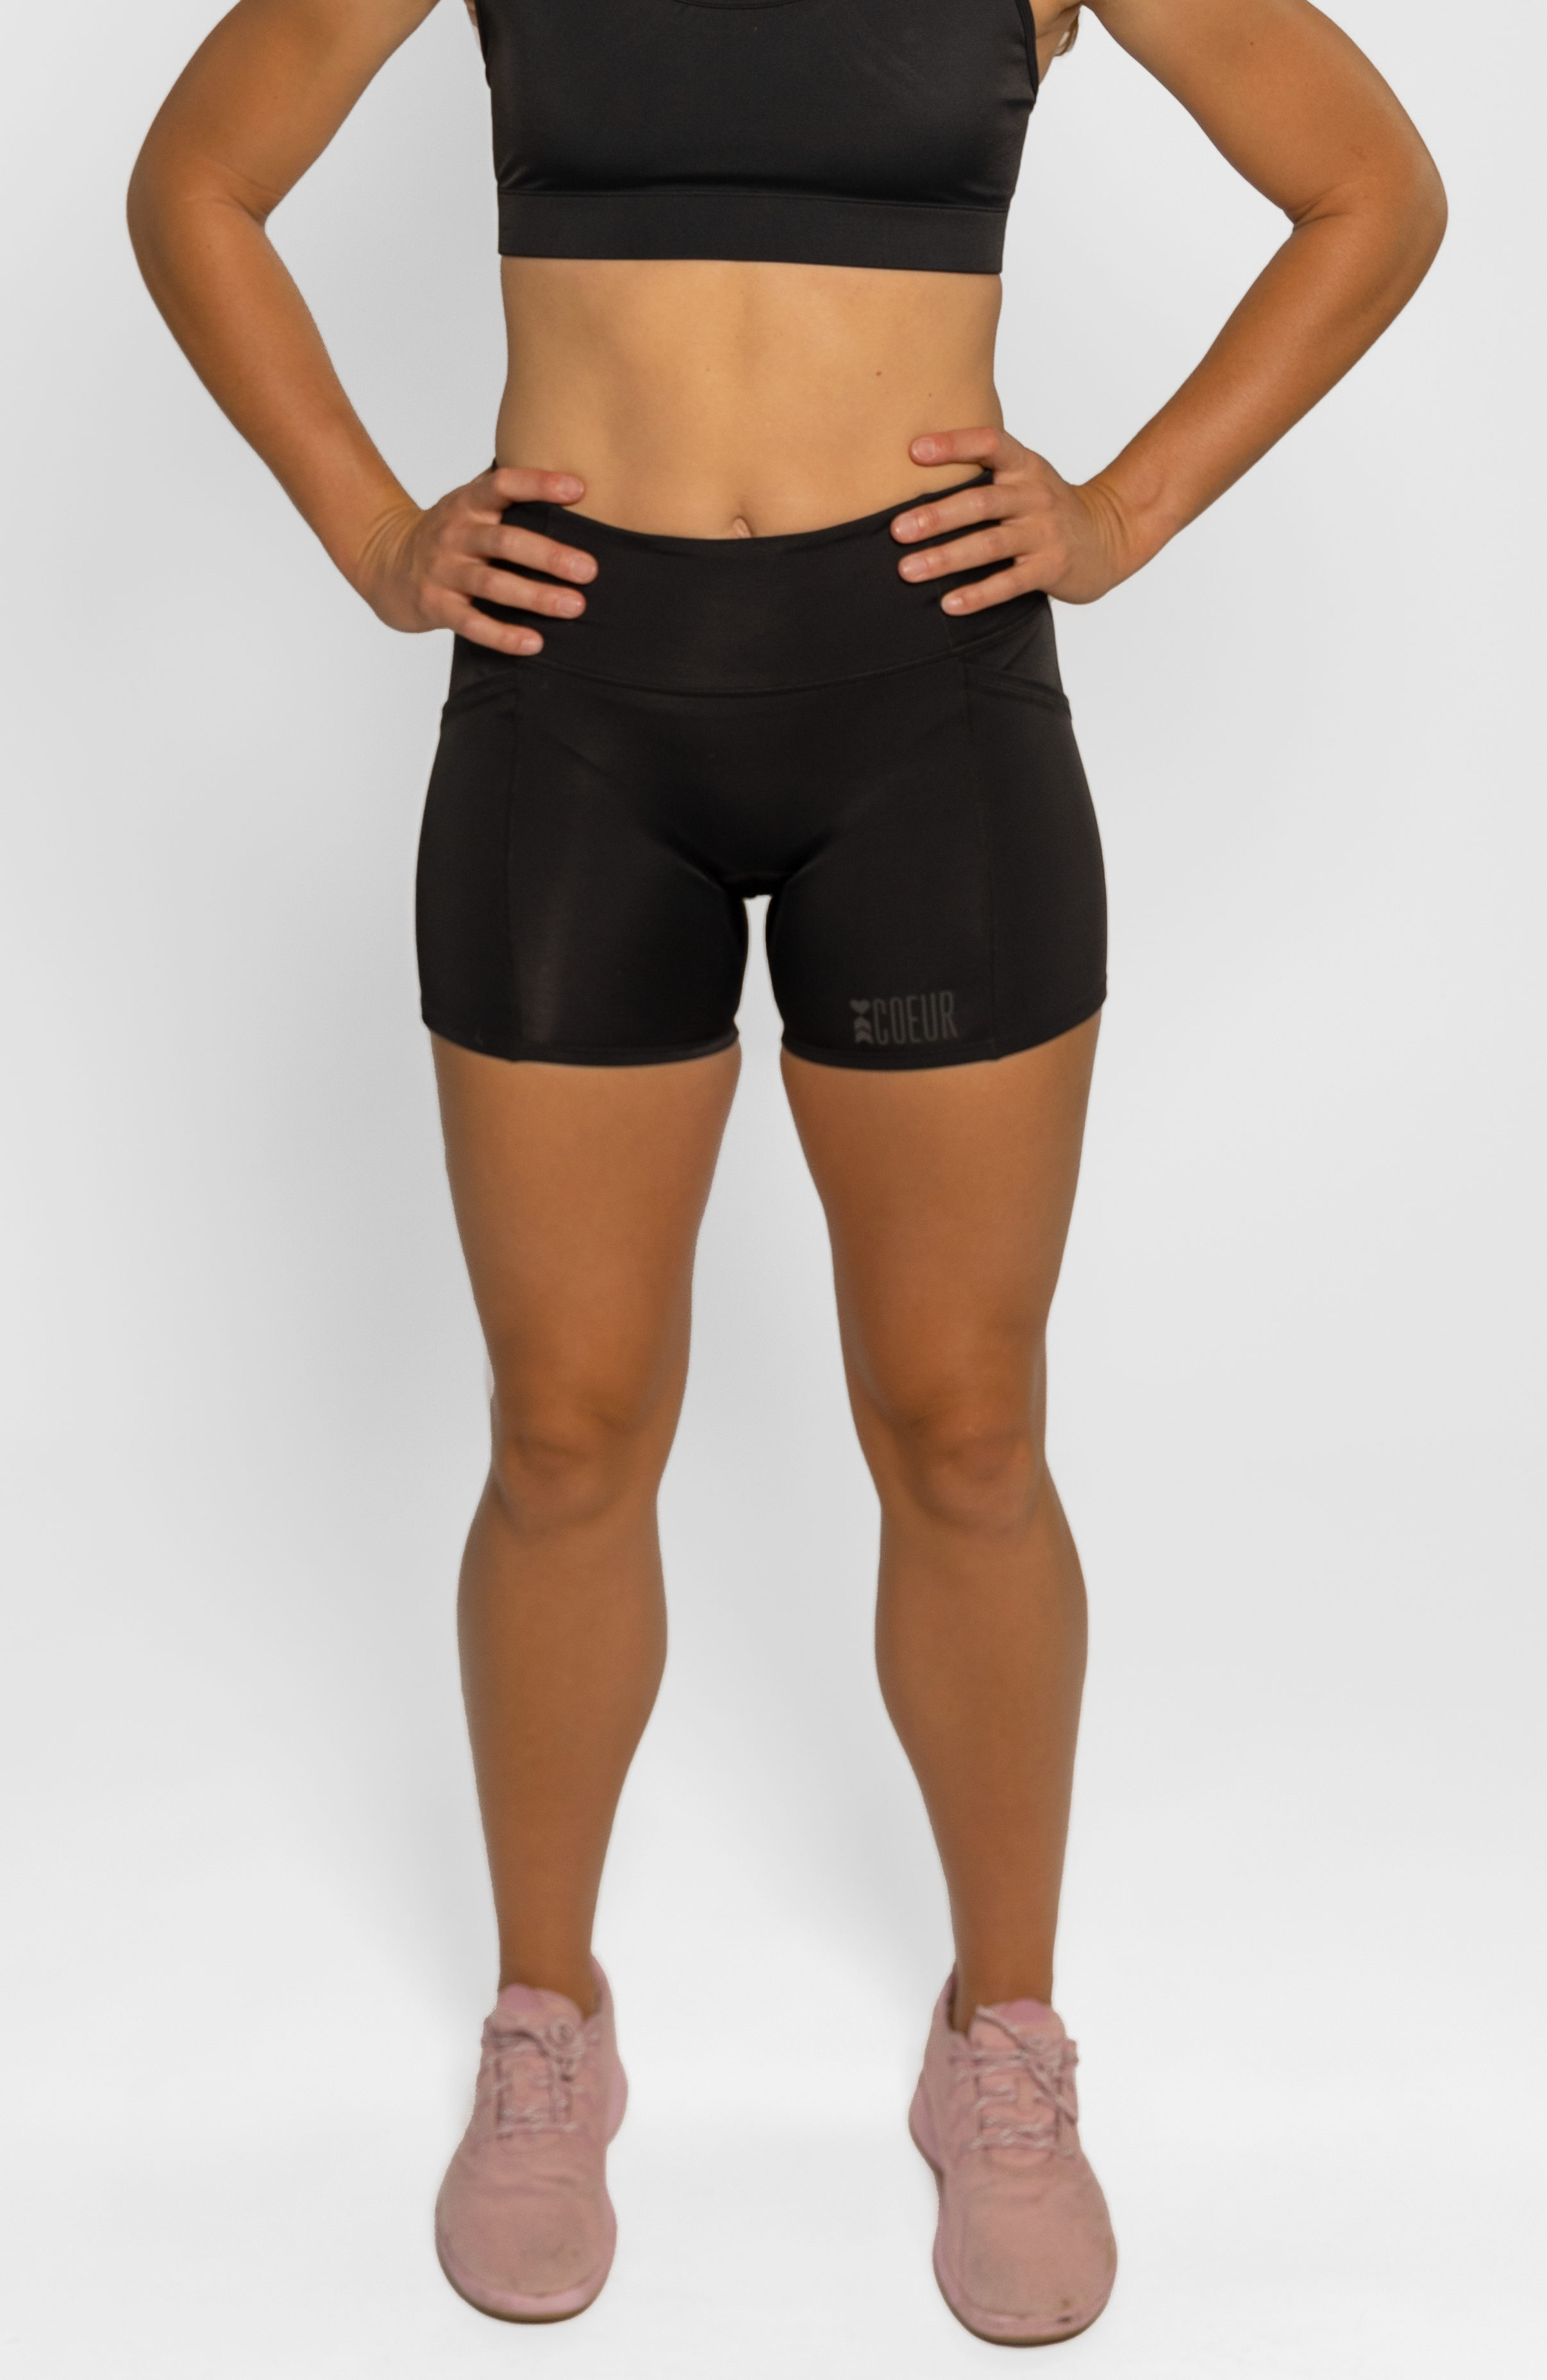 Cute Booty Shorts, Hot Shorts for Gym or Lounge Moisture-wicking